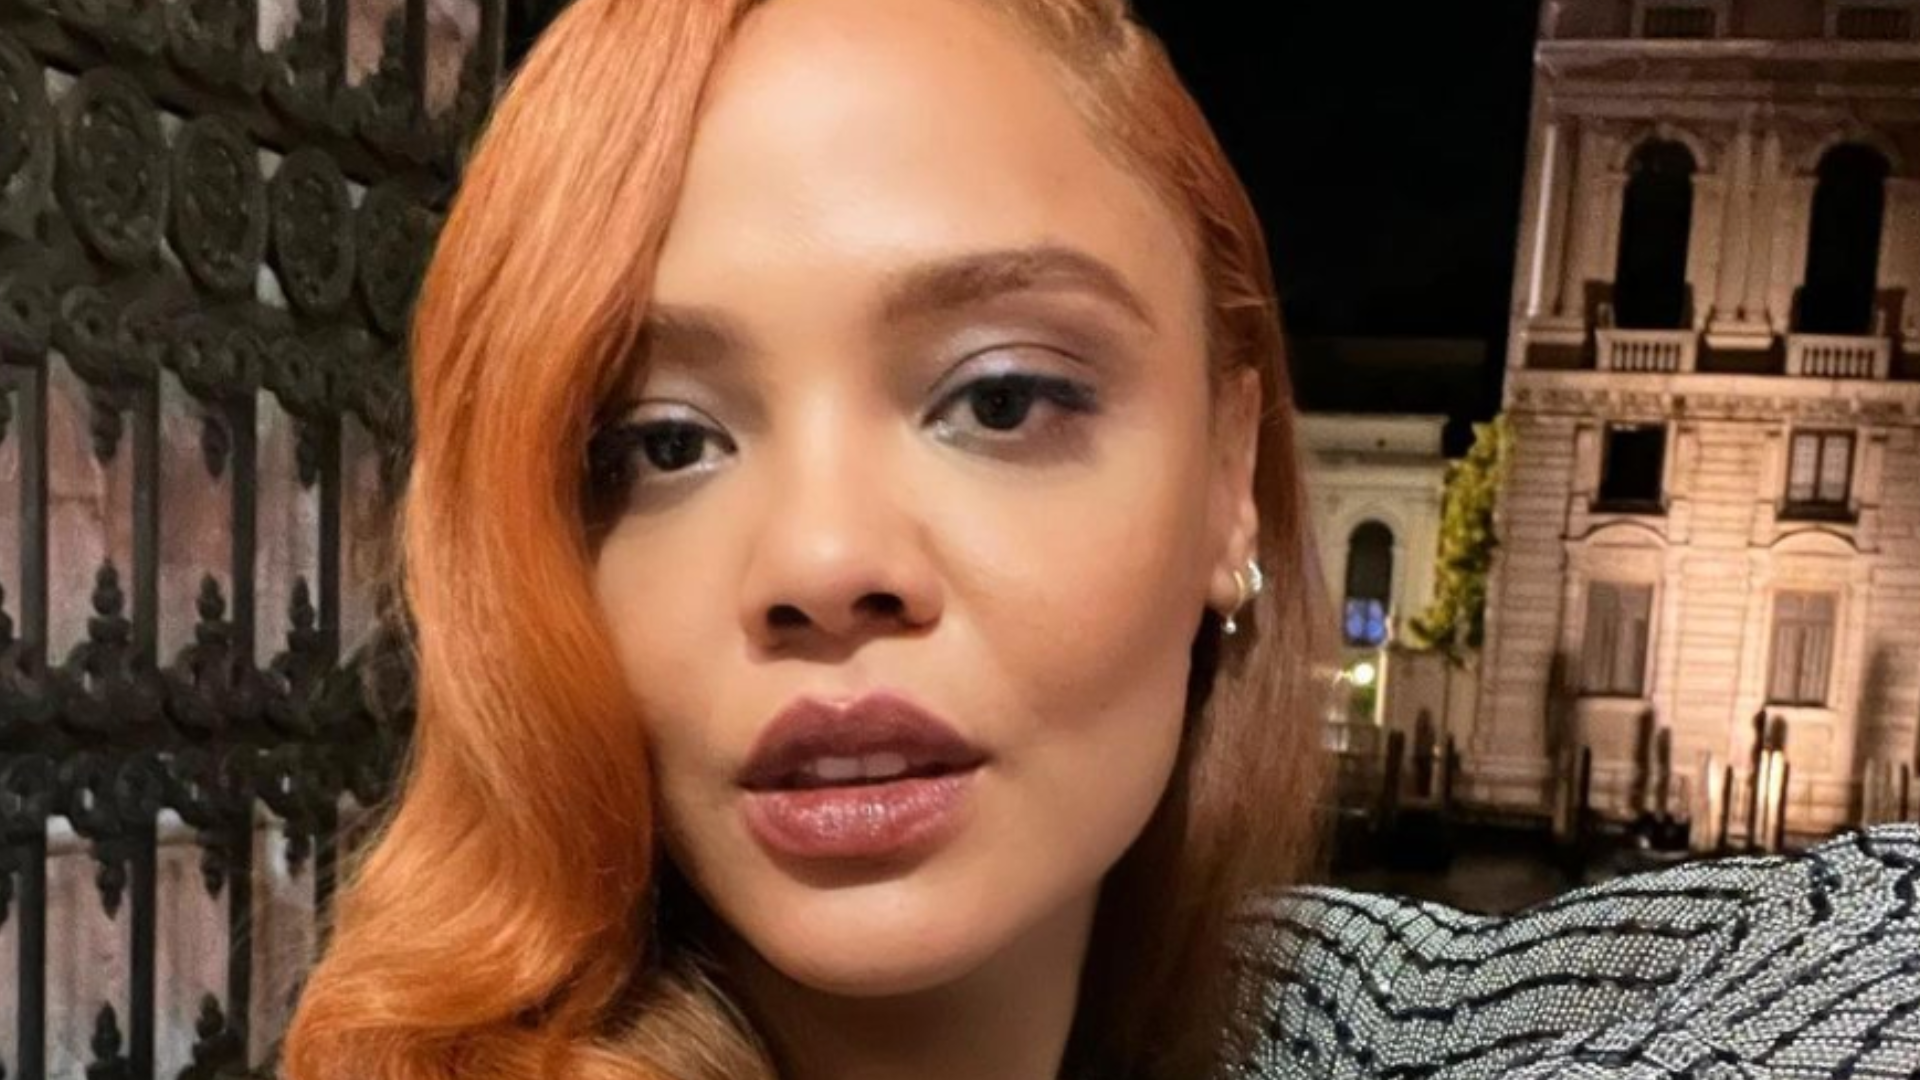 Actress Tessa Thompson Dyes Hair Red: “I Would Love To Be A Redhead”